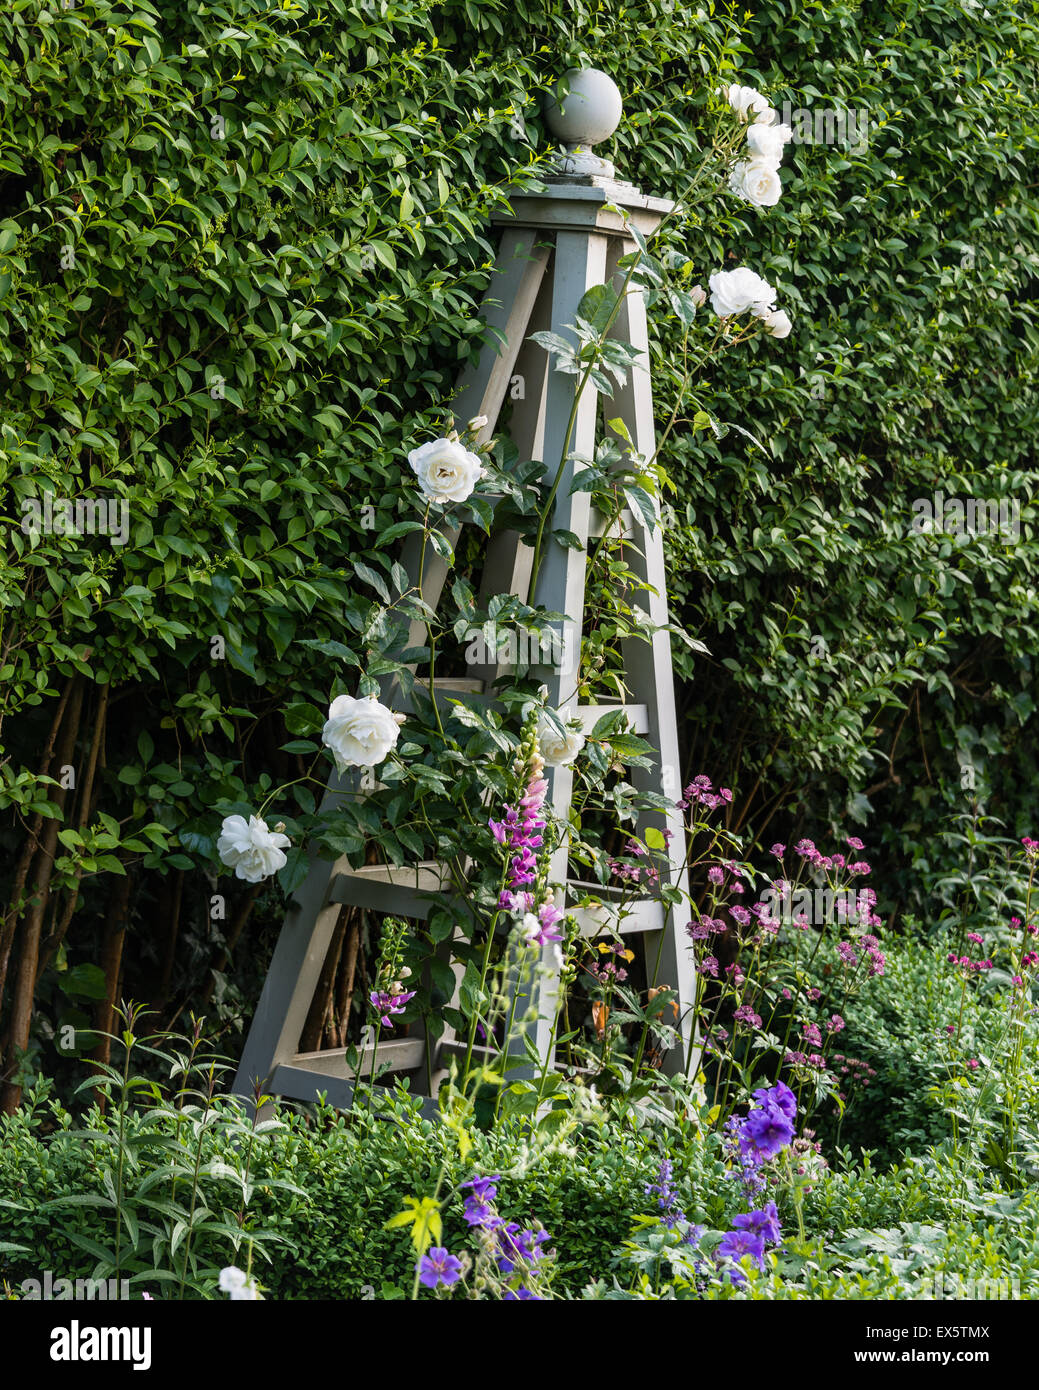 Climbing rose on plant stand Stock Photo